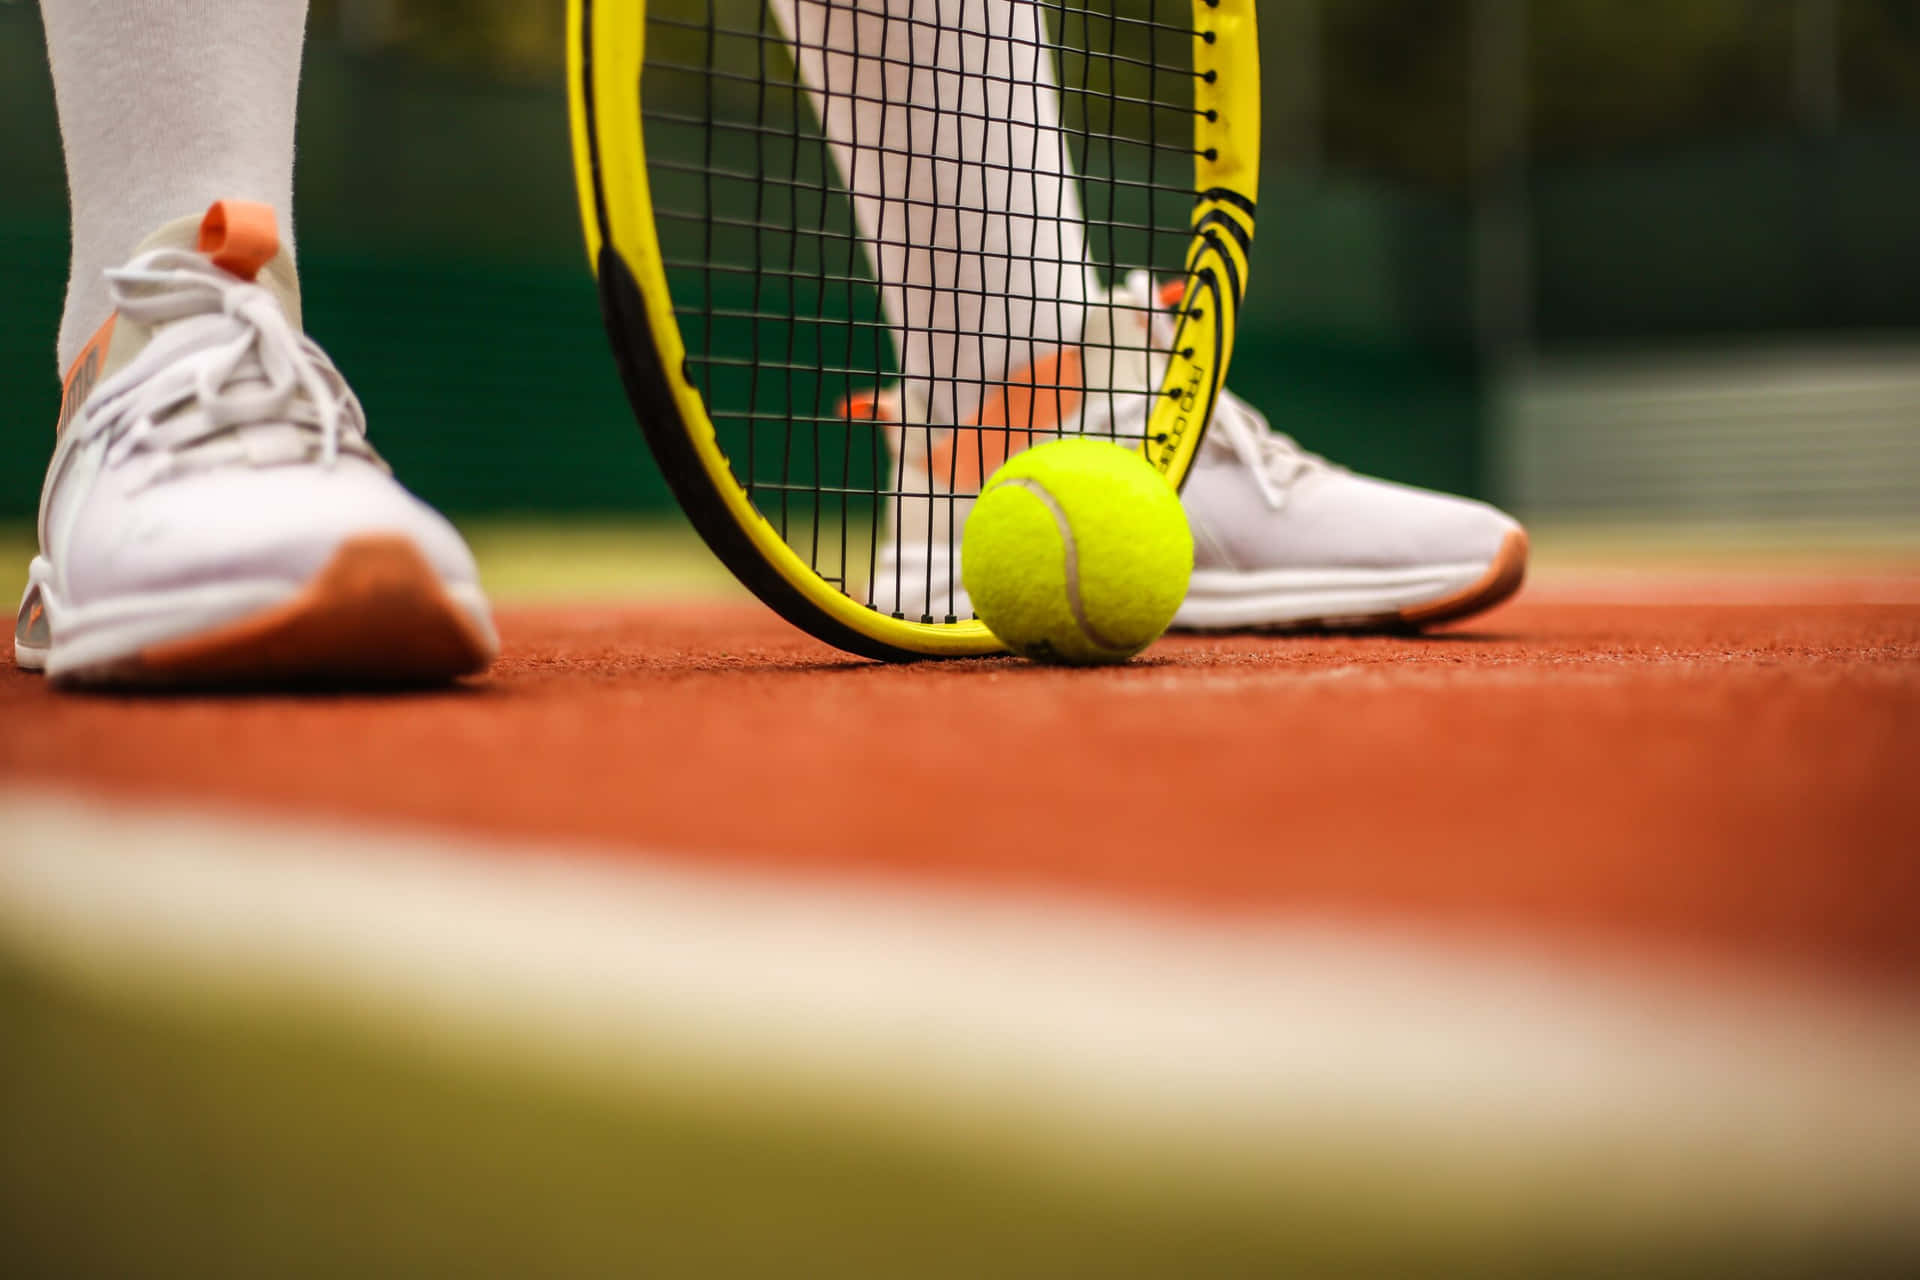 Tennis Player's Feet And Racket On Court